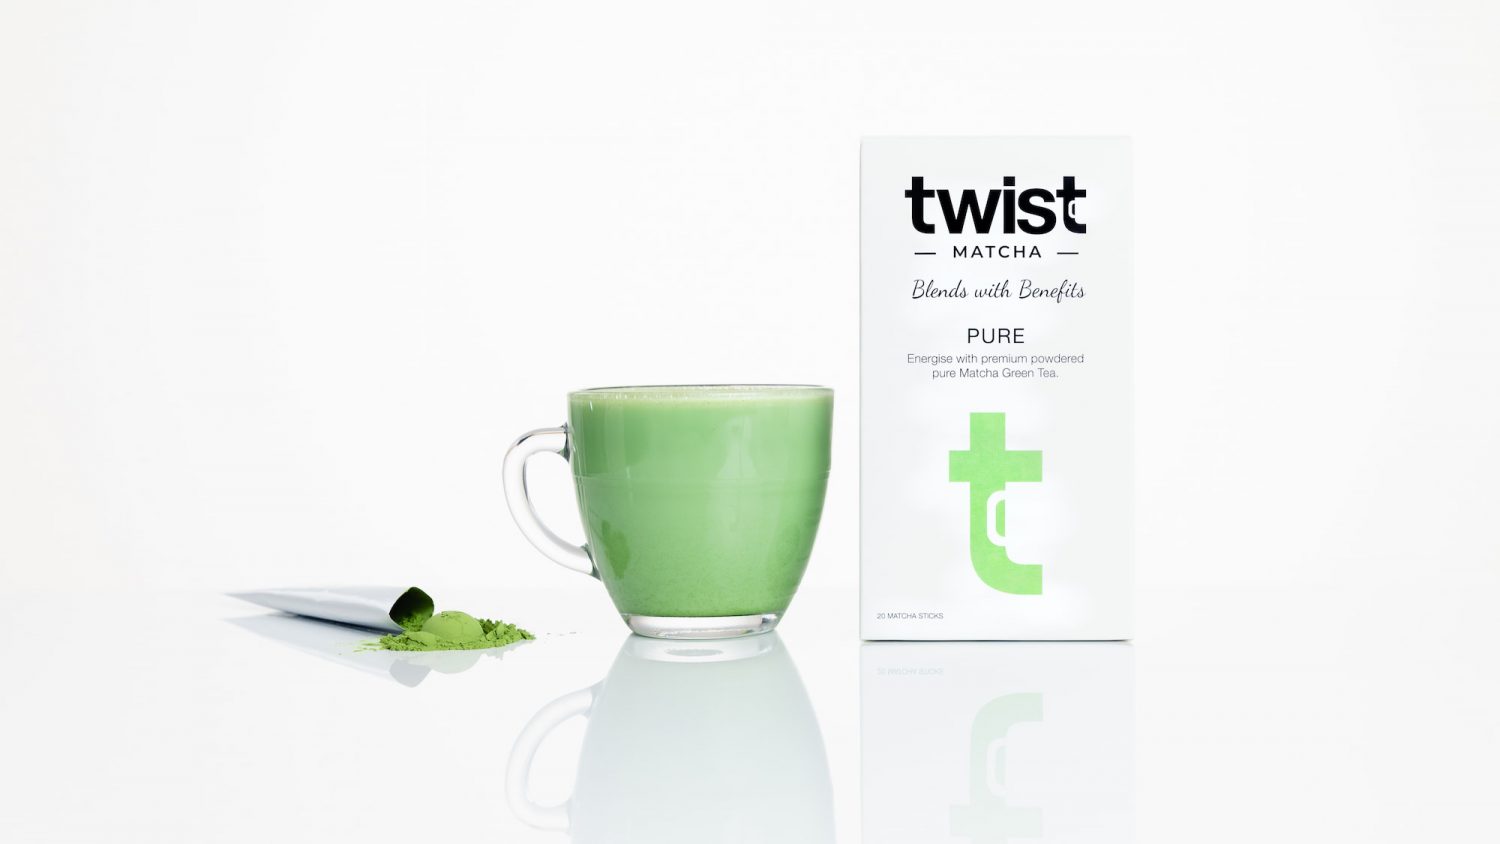 A recommended pure Twist Teas Matcha Carton and sachet, placed either side of a Matcha latte.